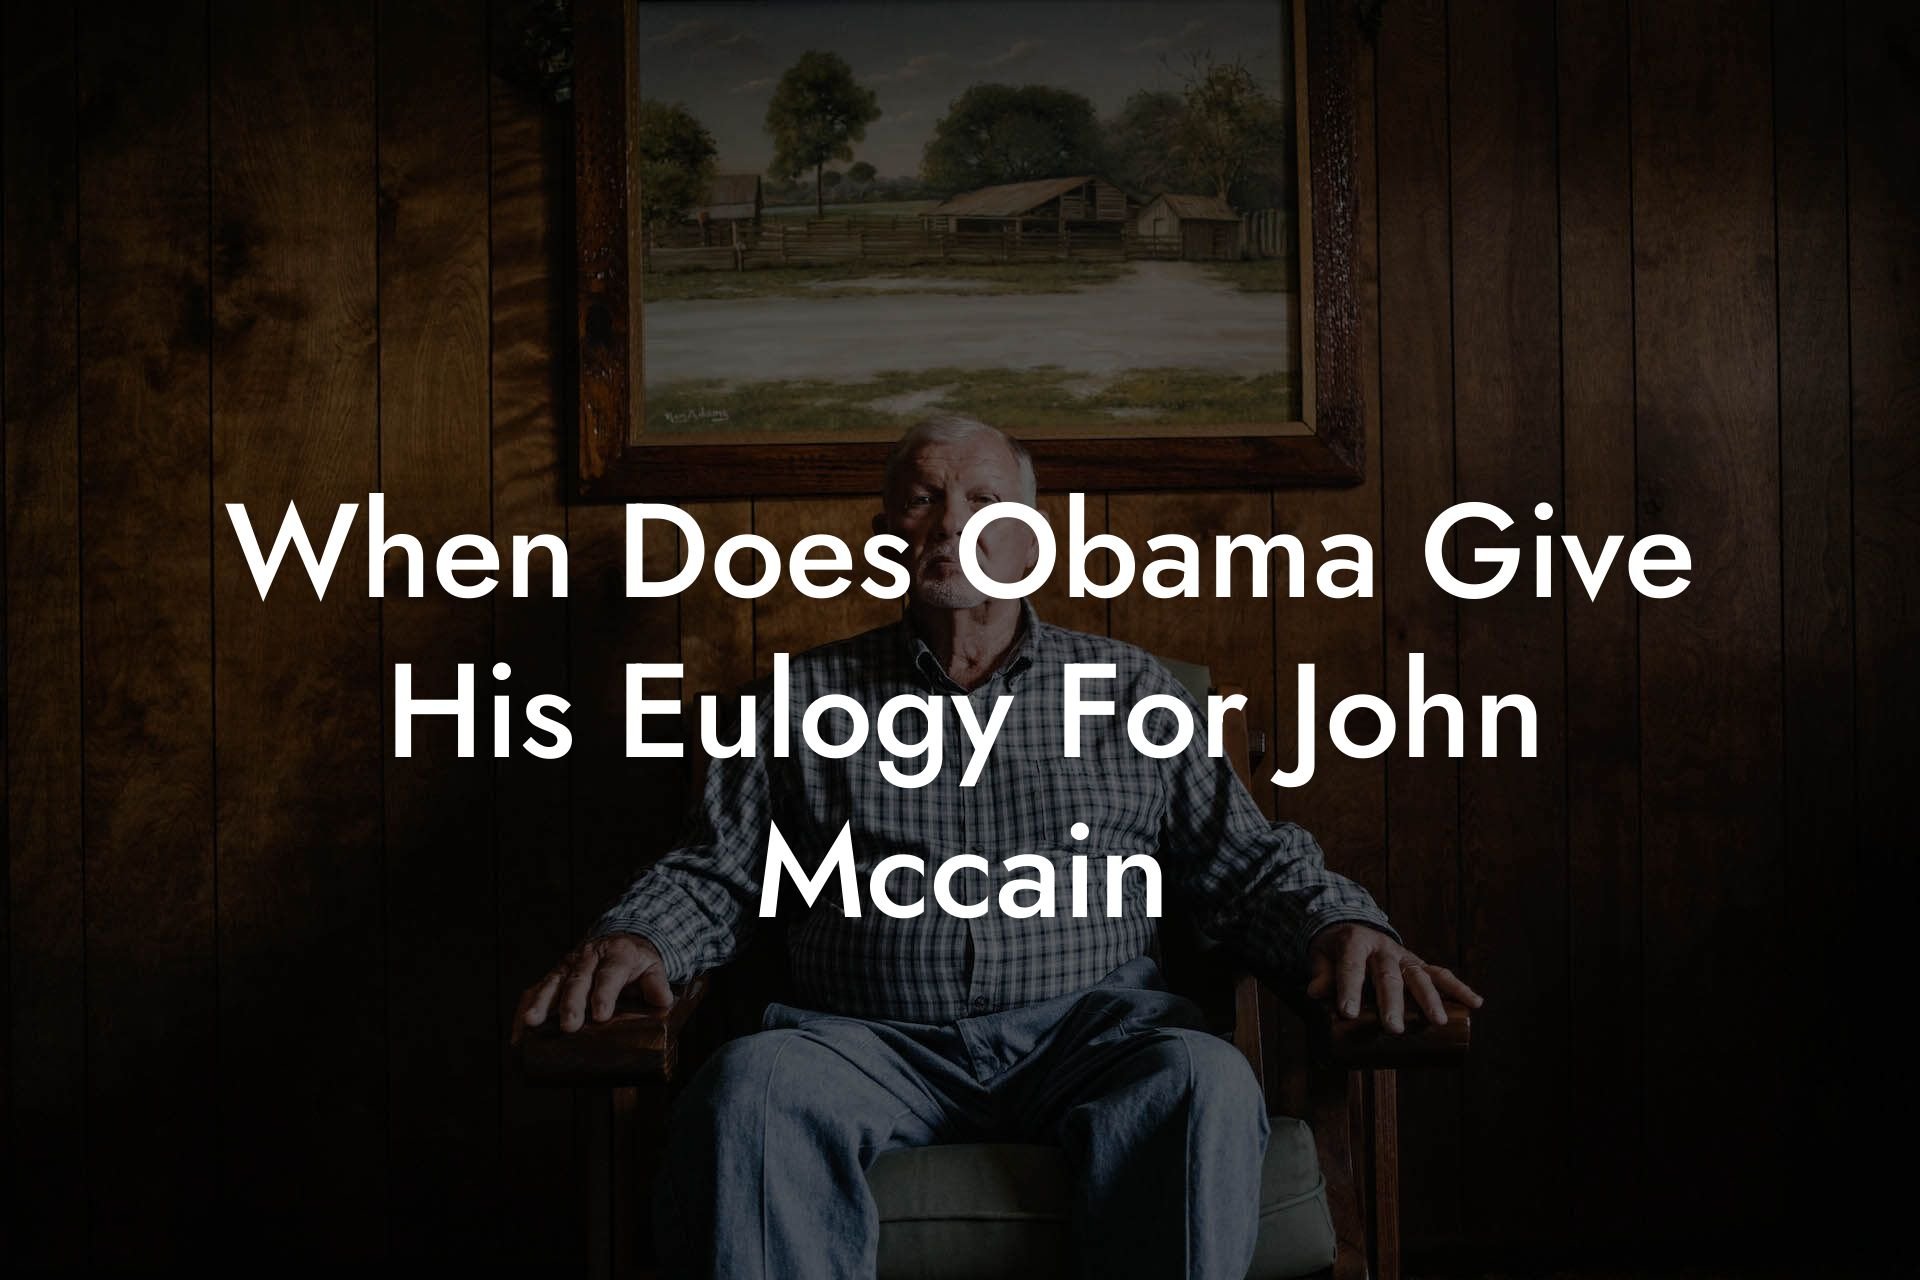 When Does Obama Give His Eulogy For John Mccain